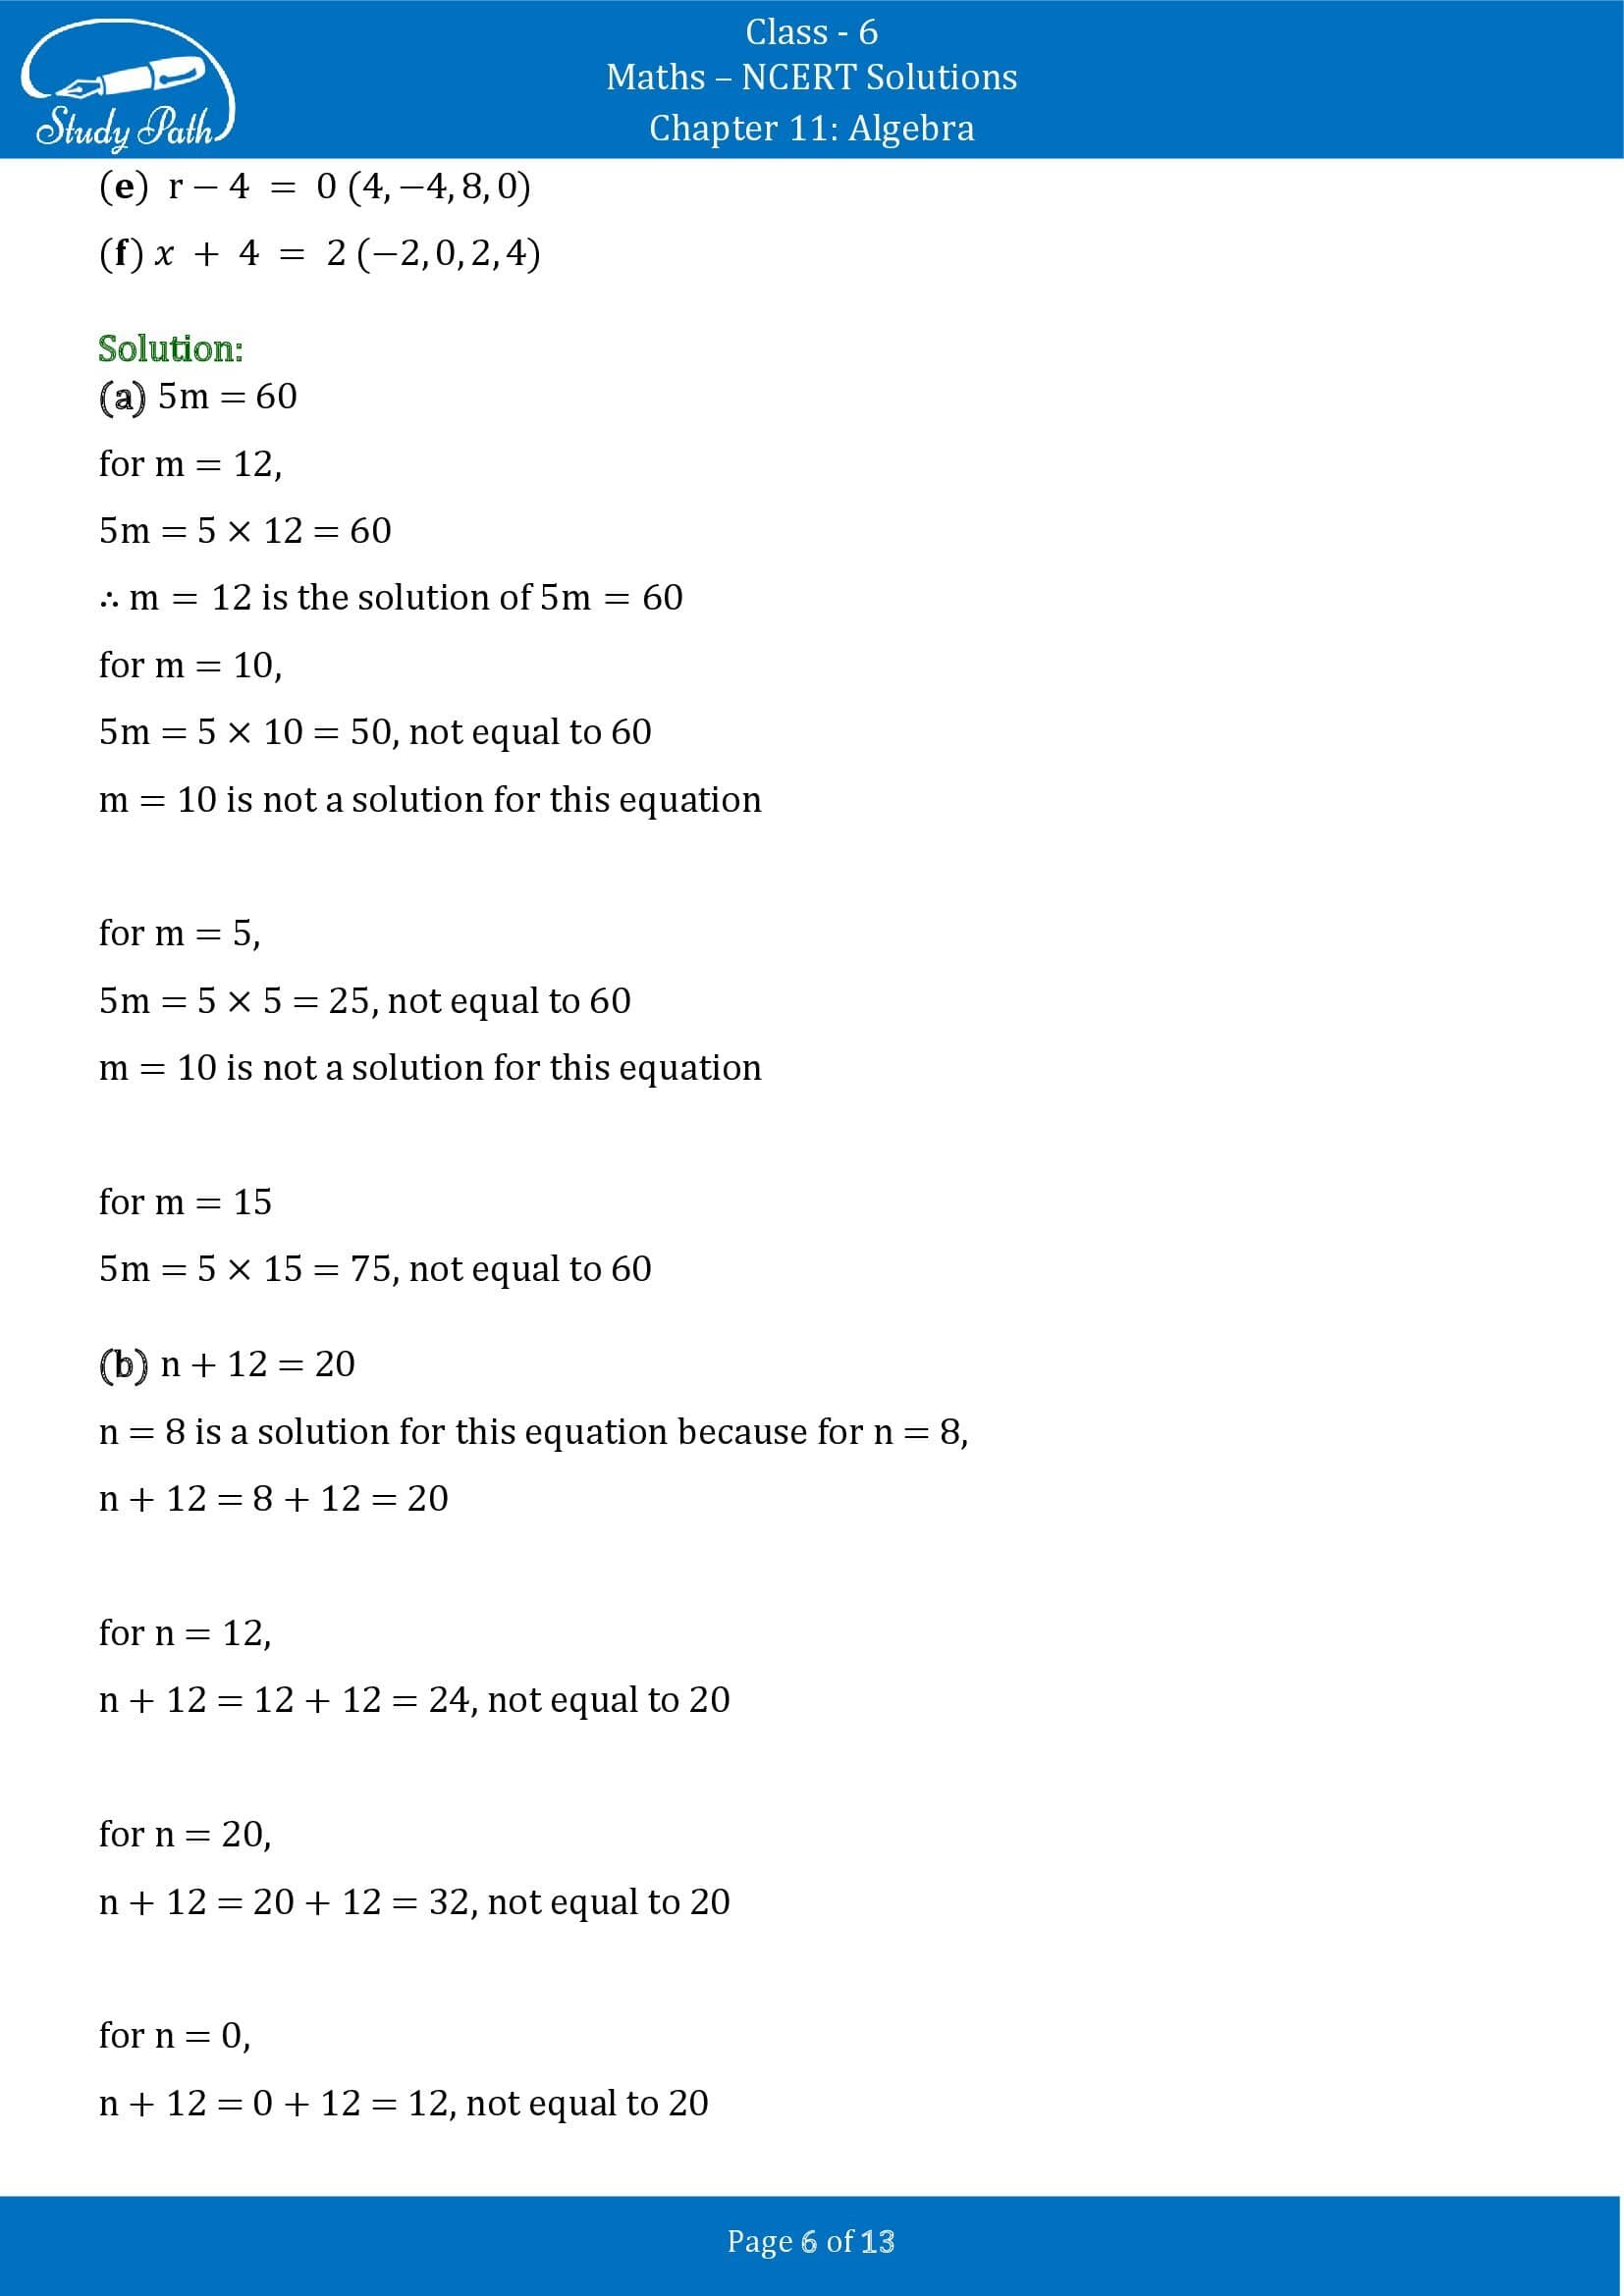 NCERT Solutions for Class 6 Maths Chapter 11 Algebra Exercise 11.5 00006